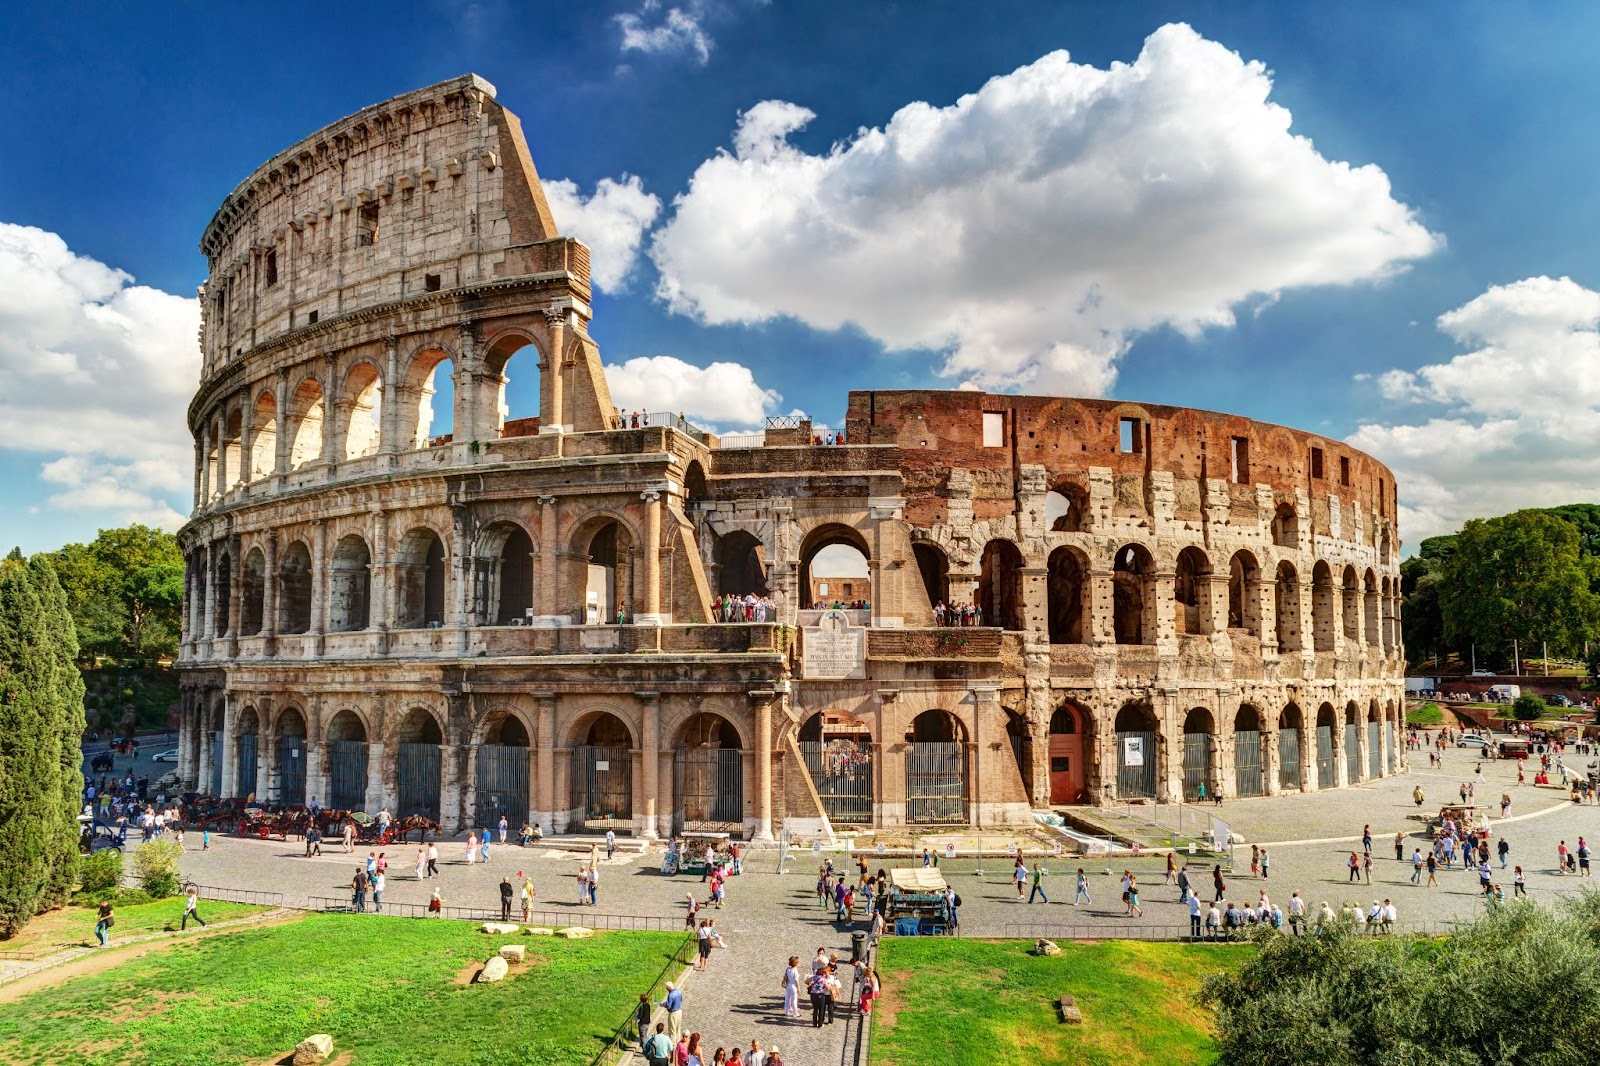 The Colosseum, Italy - 23 Top Sights to See Before You Die